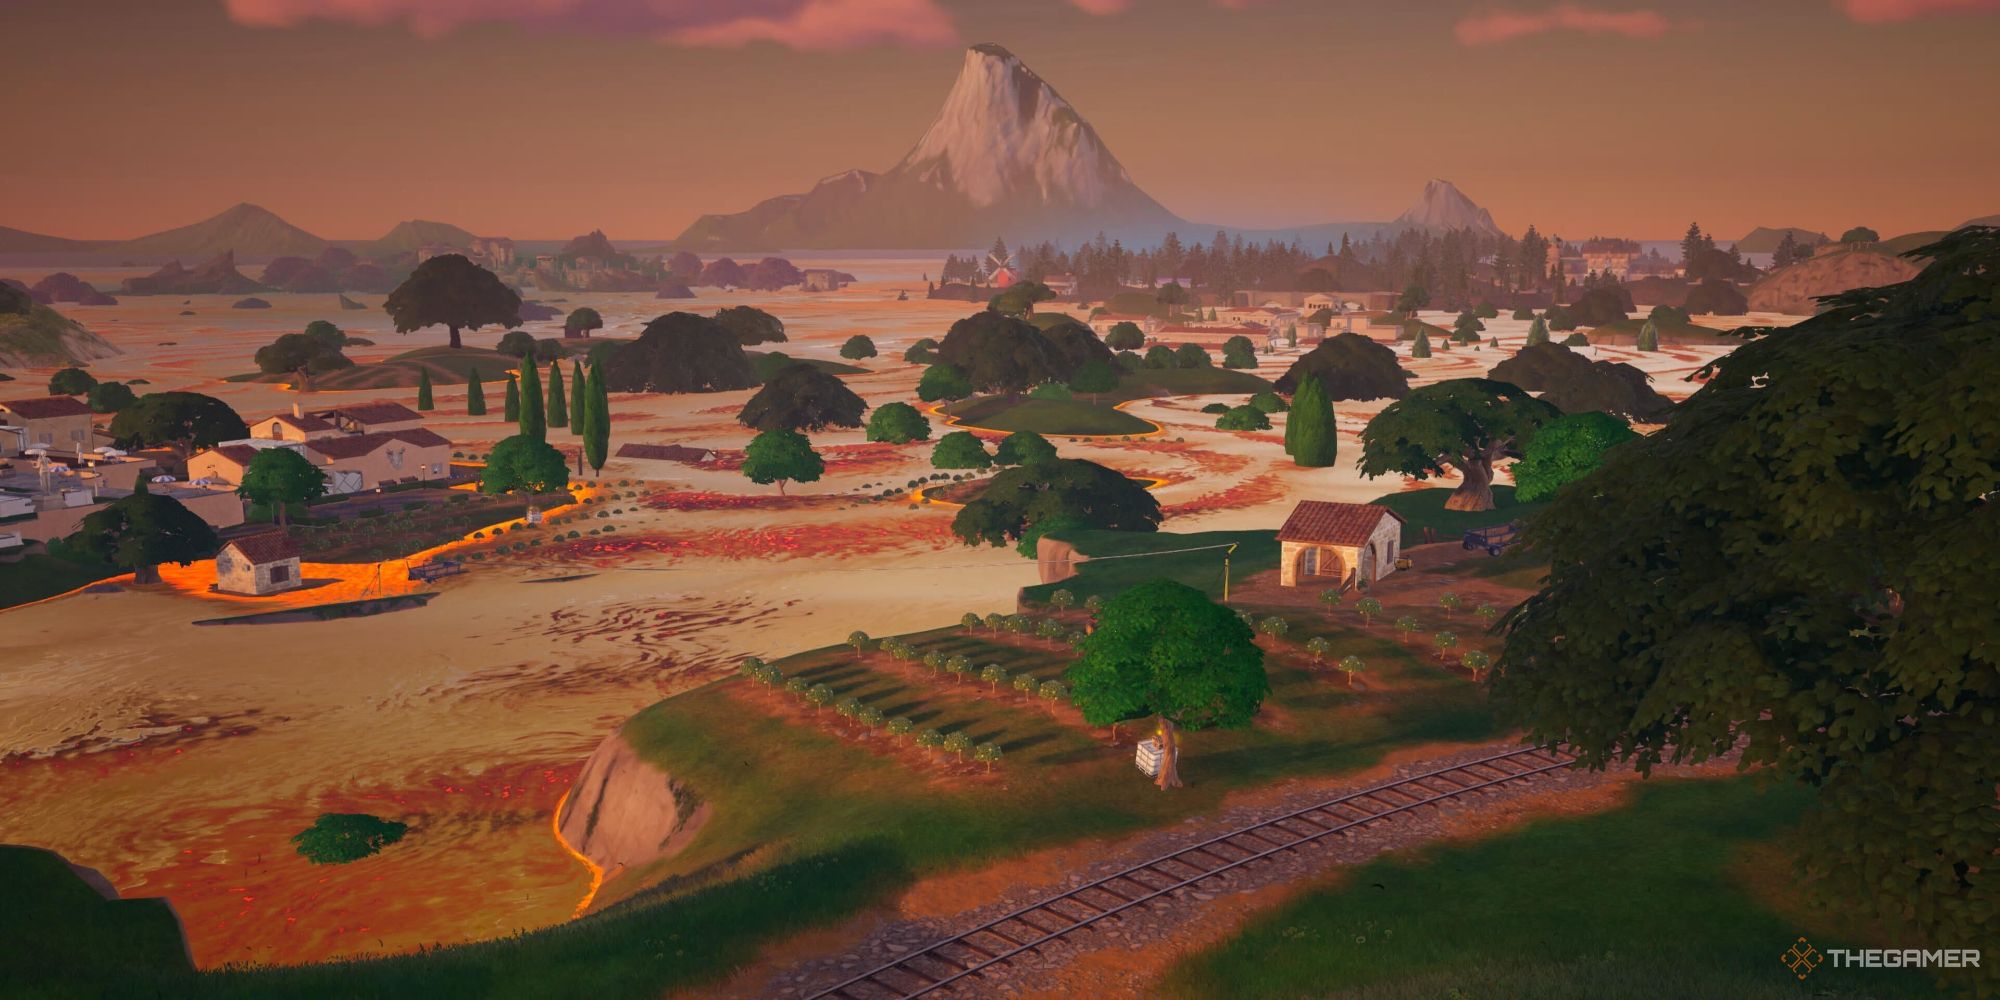 A screenshot from Fortnite Chapter Five Season Two's Limited Time Floor is Lava event where molten goldcan be seen rising across the island's landscape, with many trees sticking out of the liquid.